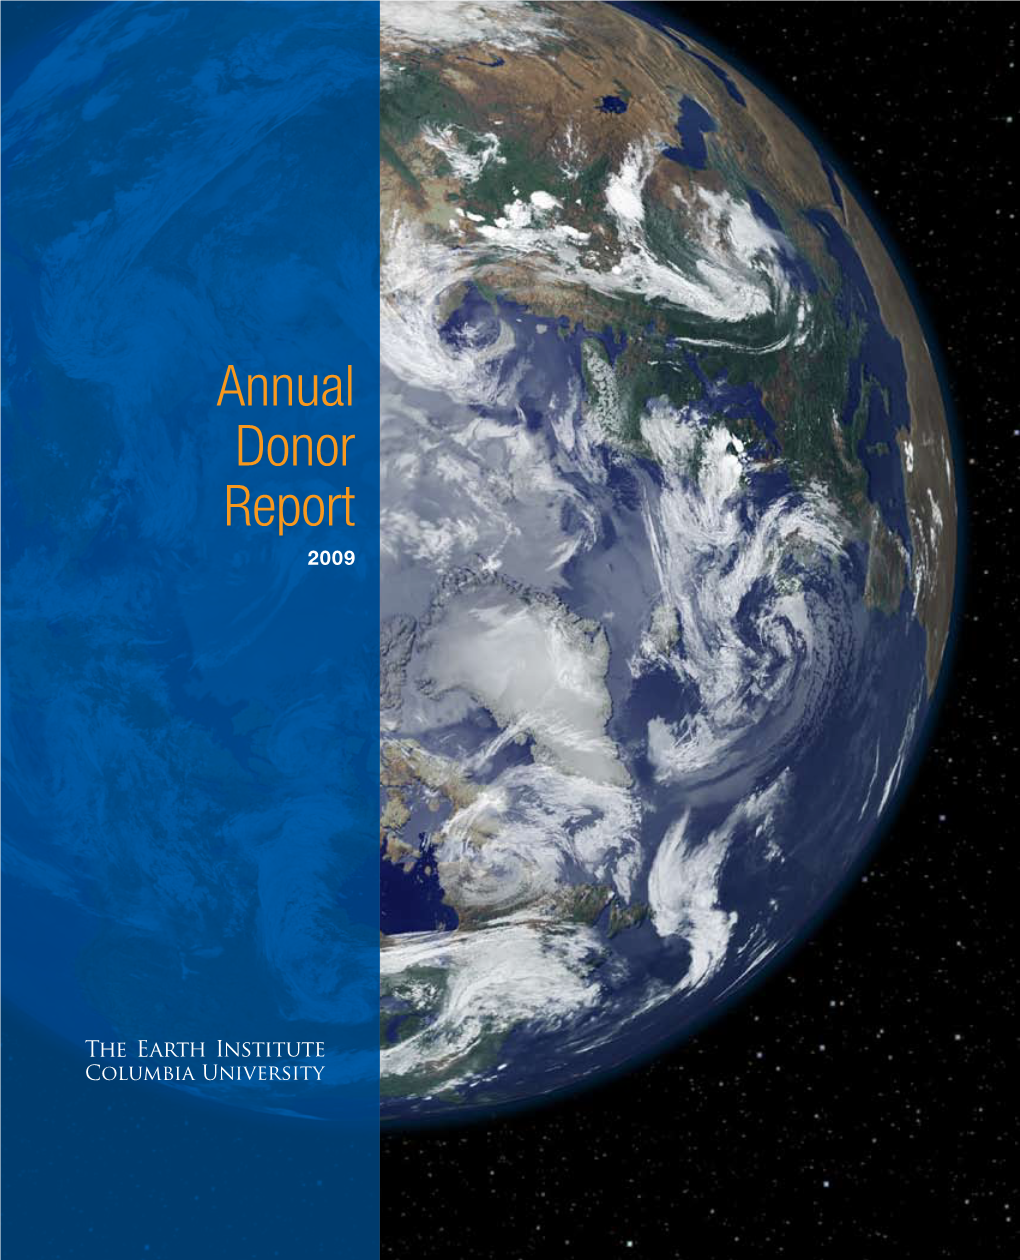 Annual Donor Report 2009 Th E E a R T H I N S T I T U T E Is Leading the Way to a Sustainable Planet by Mobilizing the Sciences, Education and Public Policy